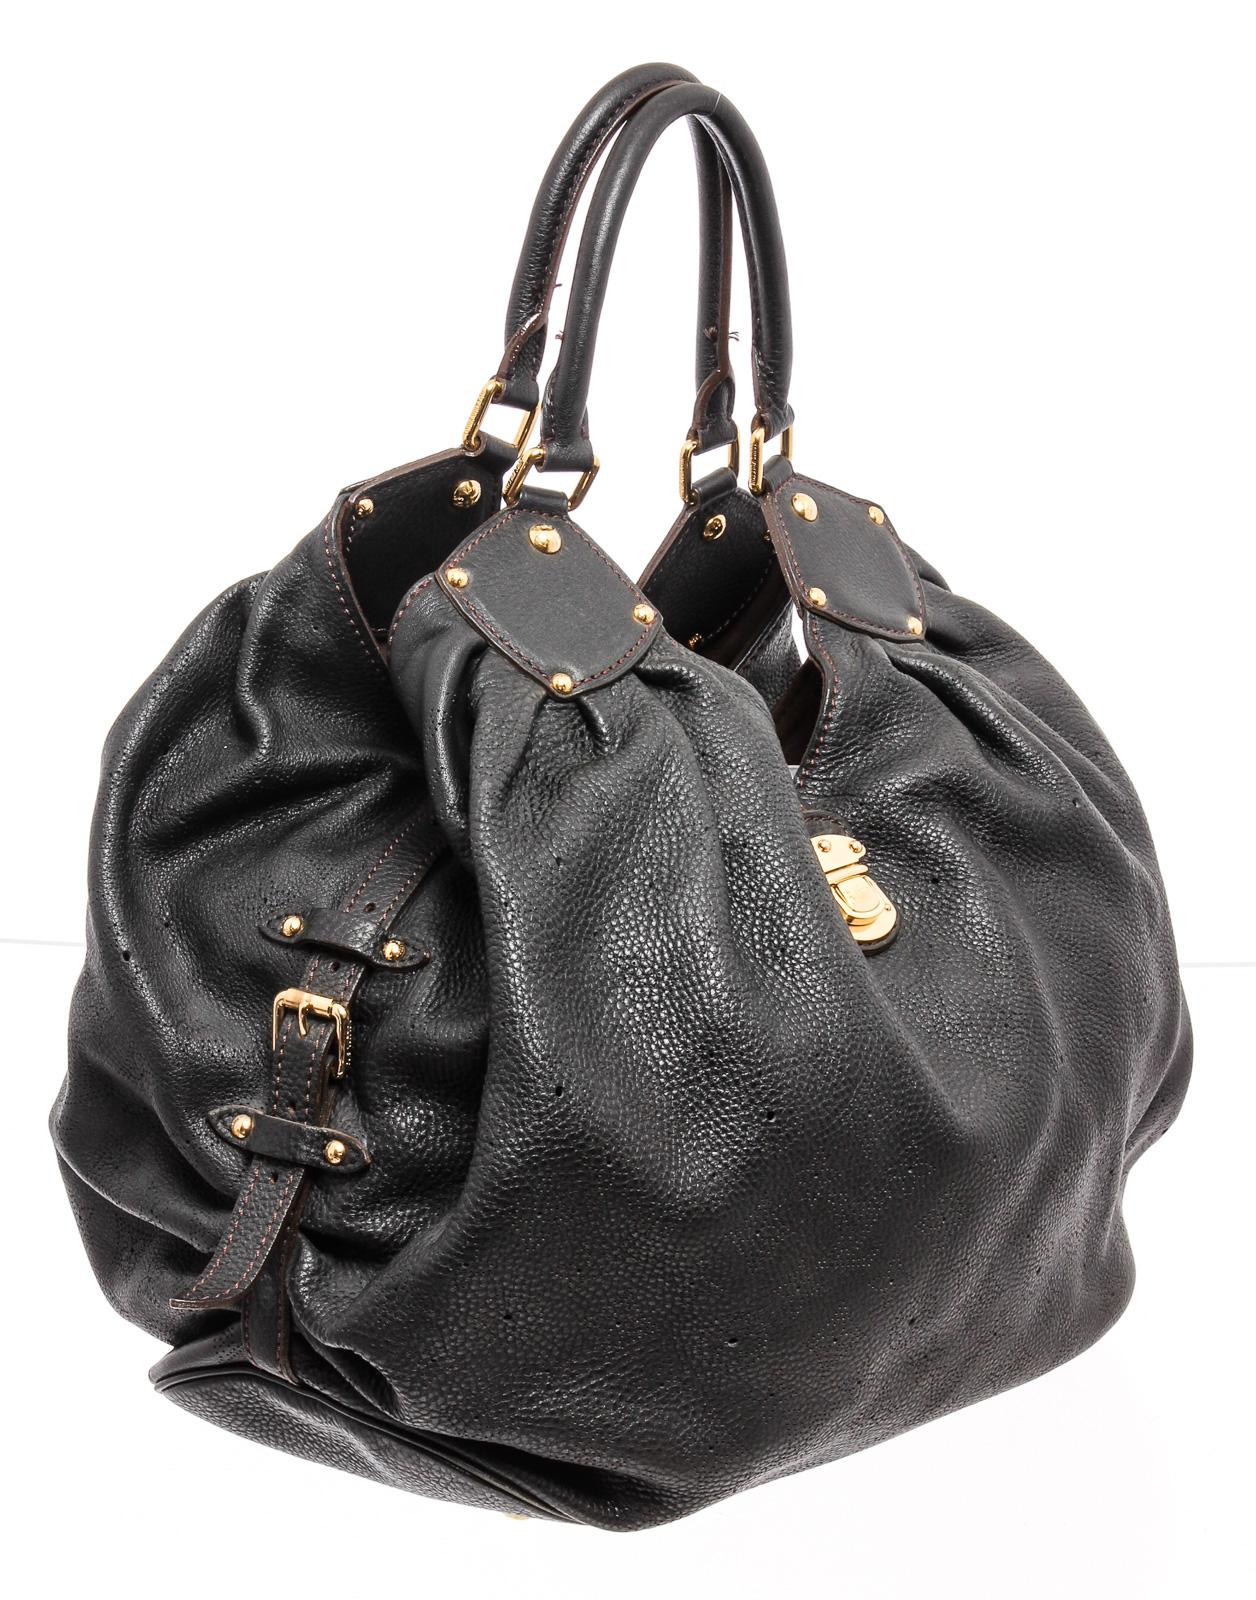 Black monogram Mahina leather Louis Vuitton XL hobo with brass hardware, dual rolled shoulder straps, chocolate Alcantara lining, single zip pocket at interior wall and clasp closure at top featuring additional push-lock closure at front strap.